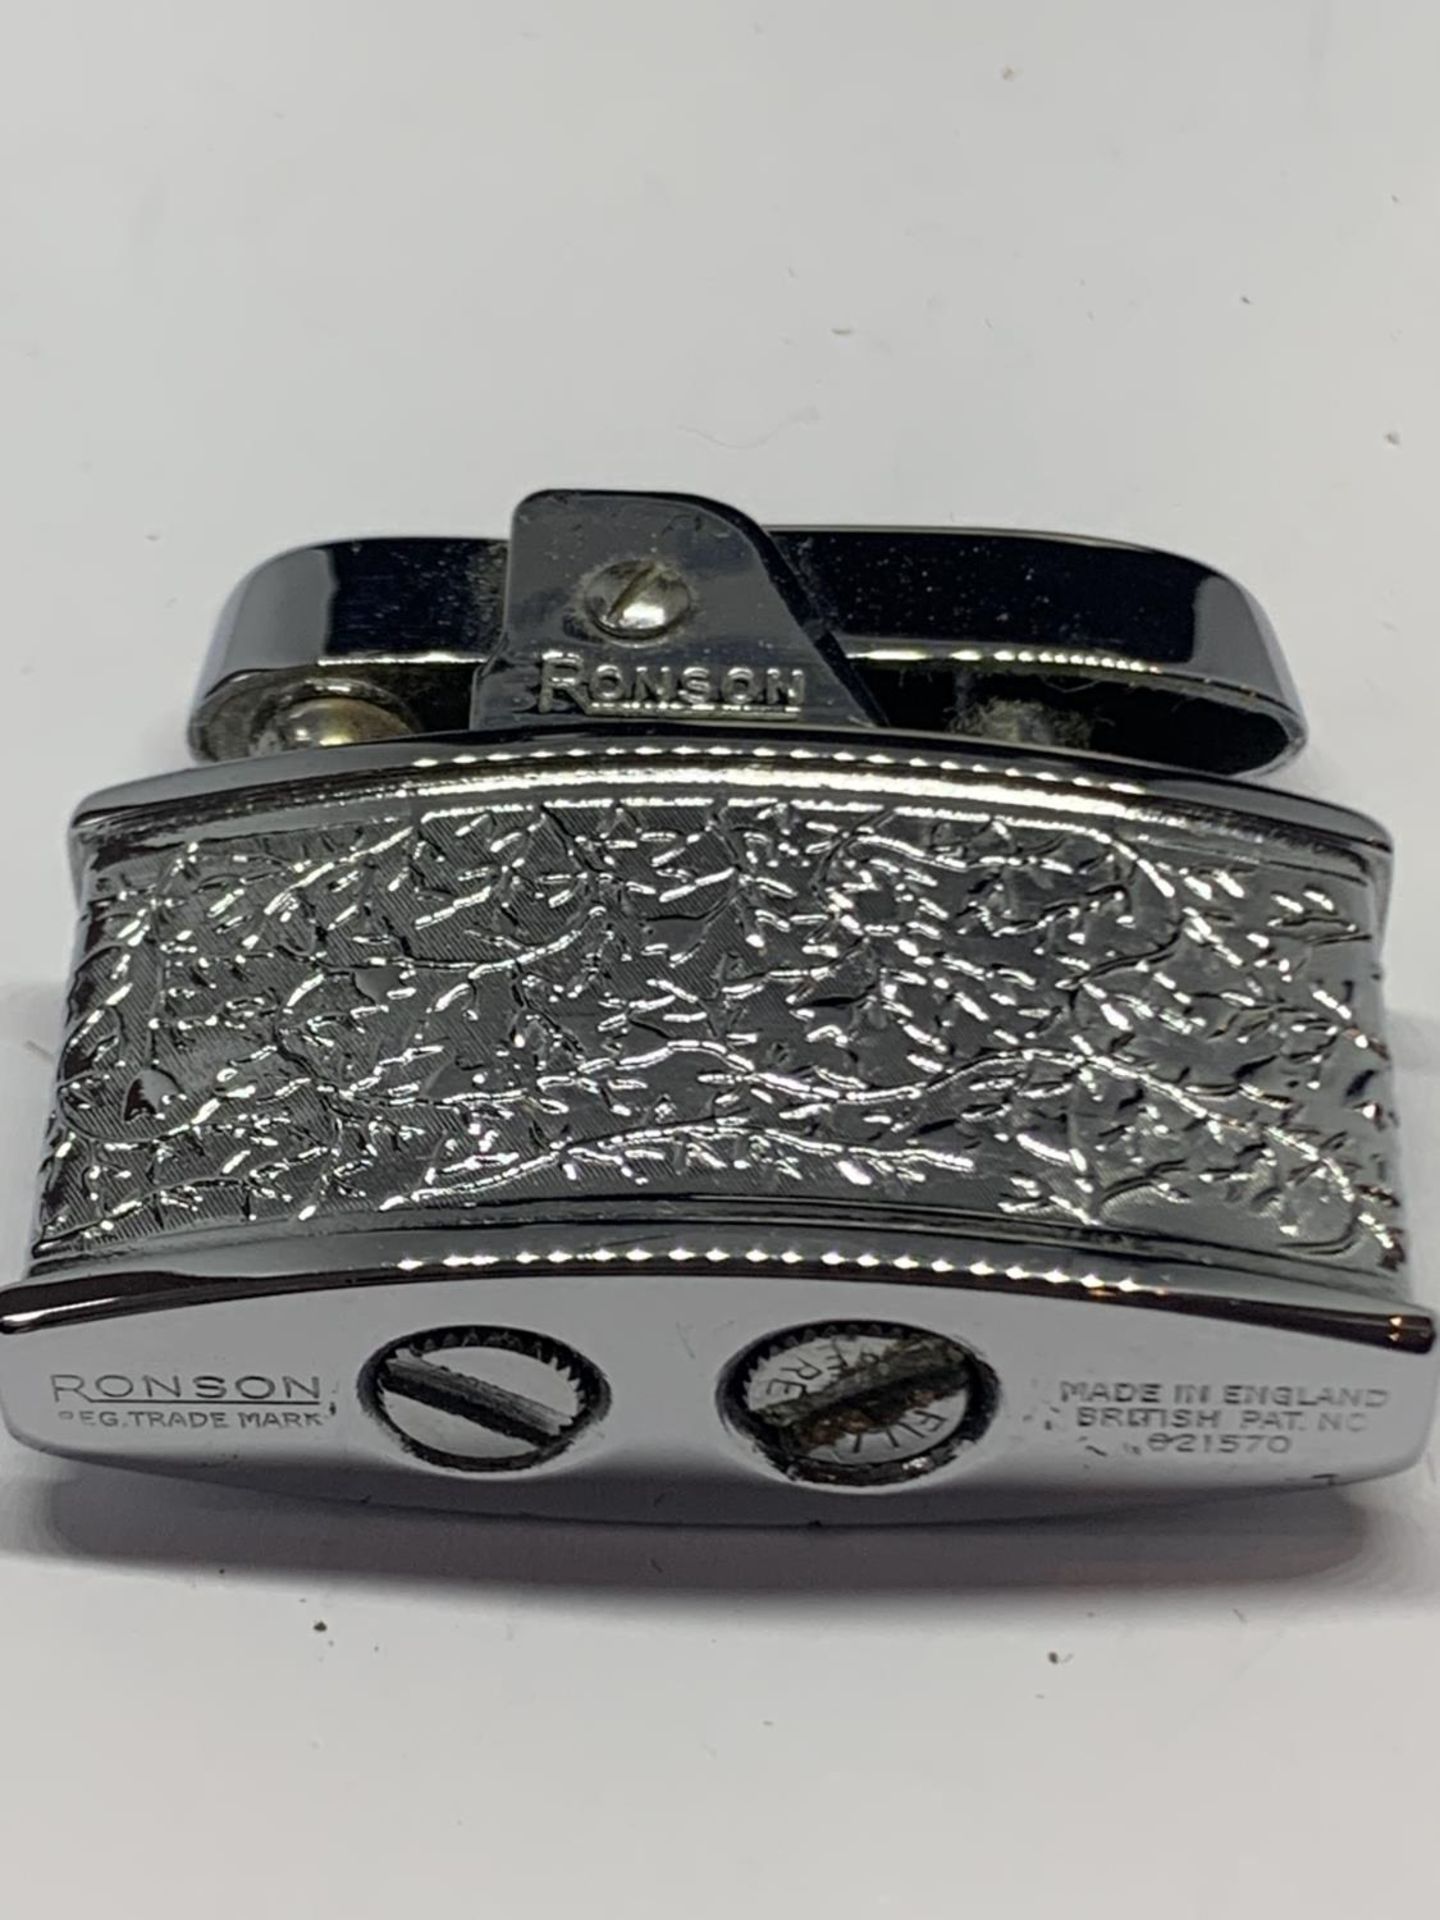 A RONSON CIGARETTE LIGHTER AND CASE - Image 3 of 3